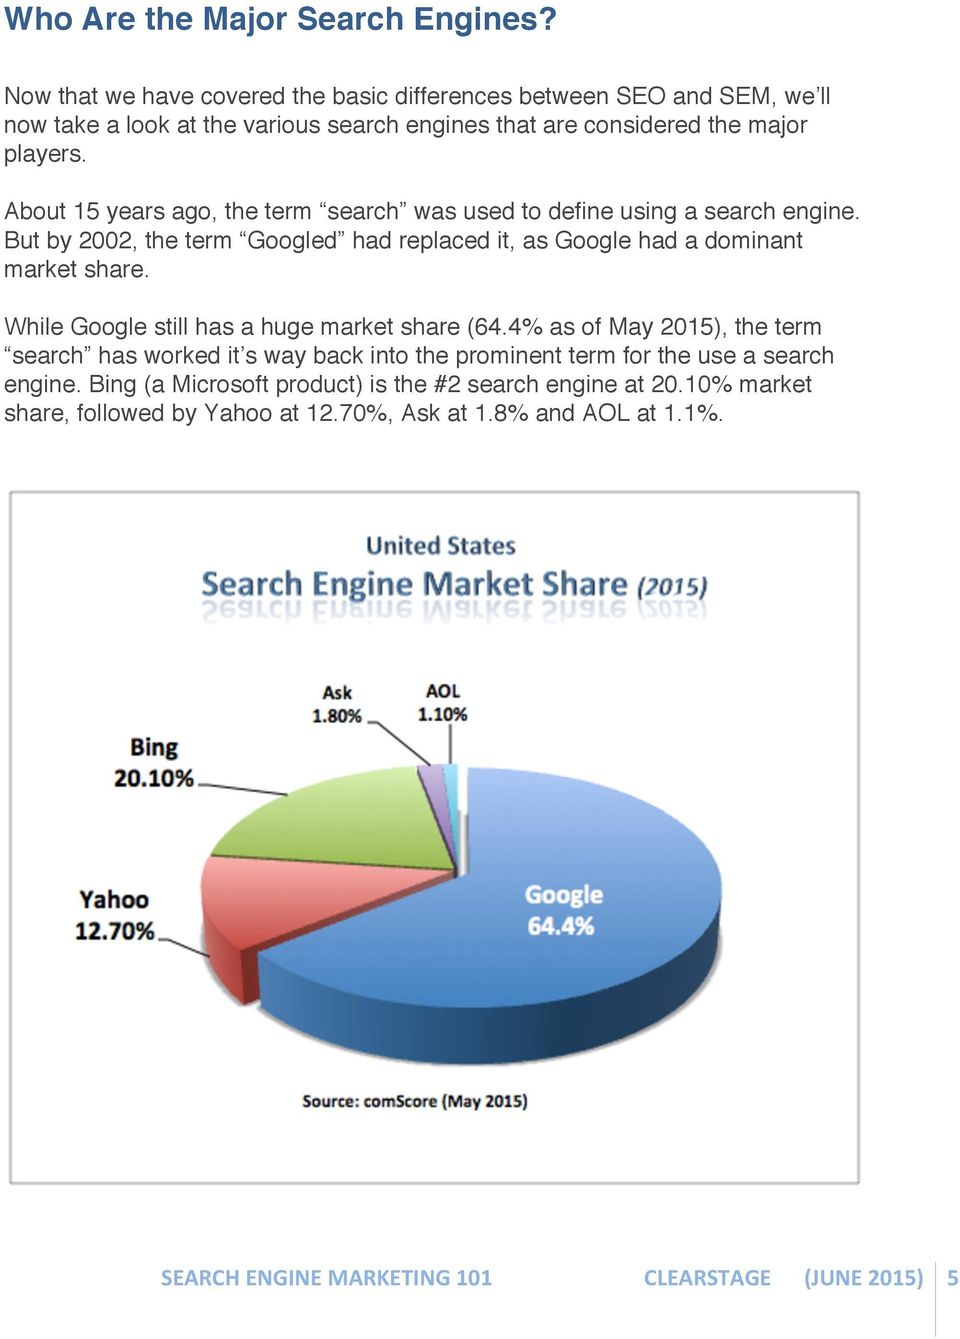 About 15 years ago, the term search was used to define using a search engine. But by 2002, the term Googled had replaced it, as Google had a dominant market share.